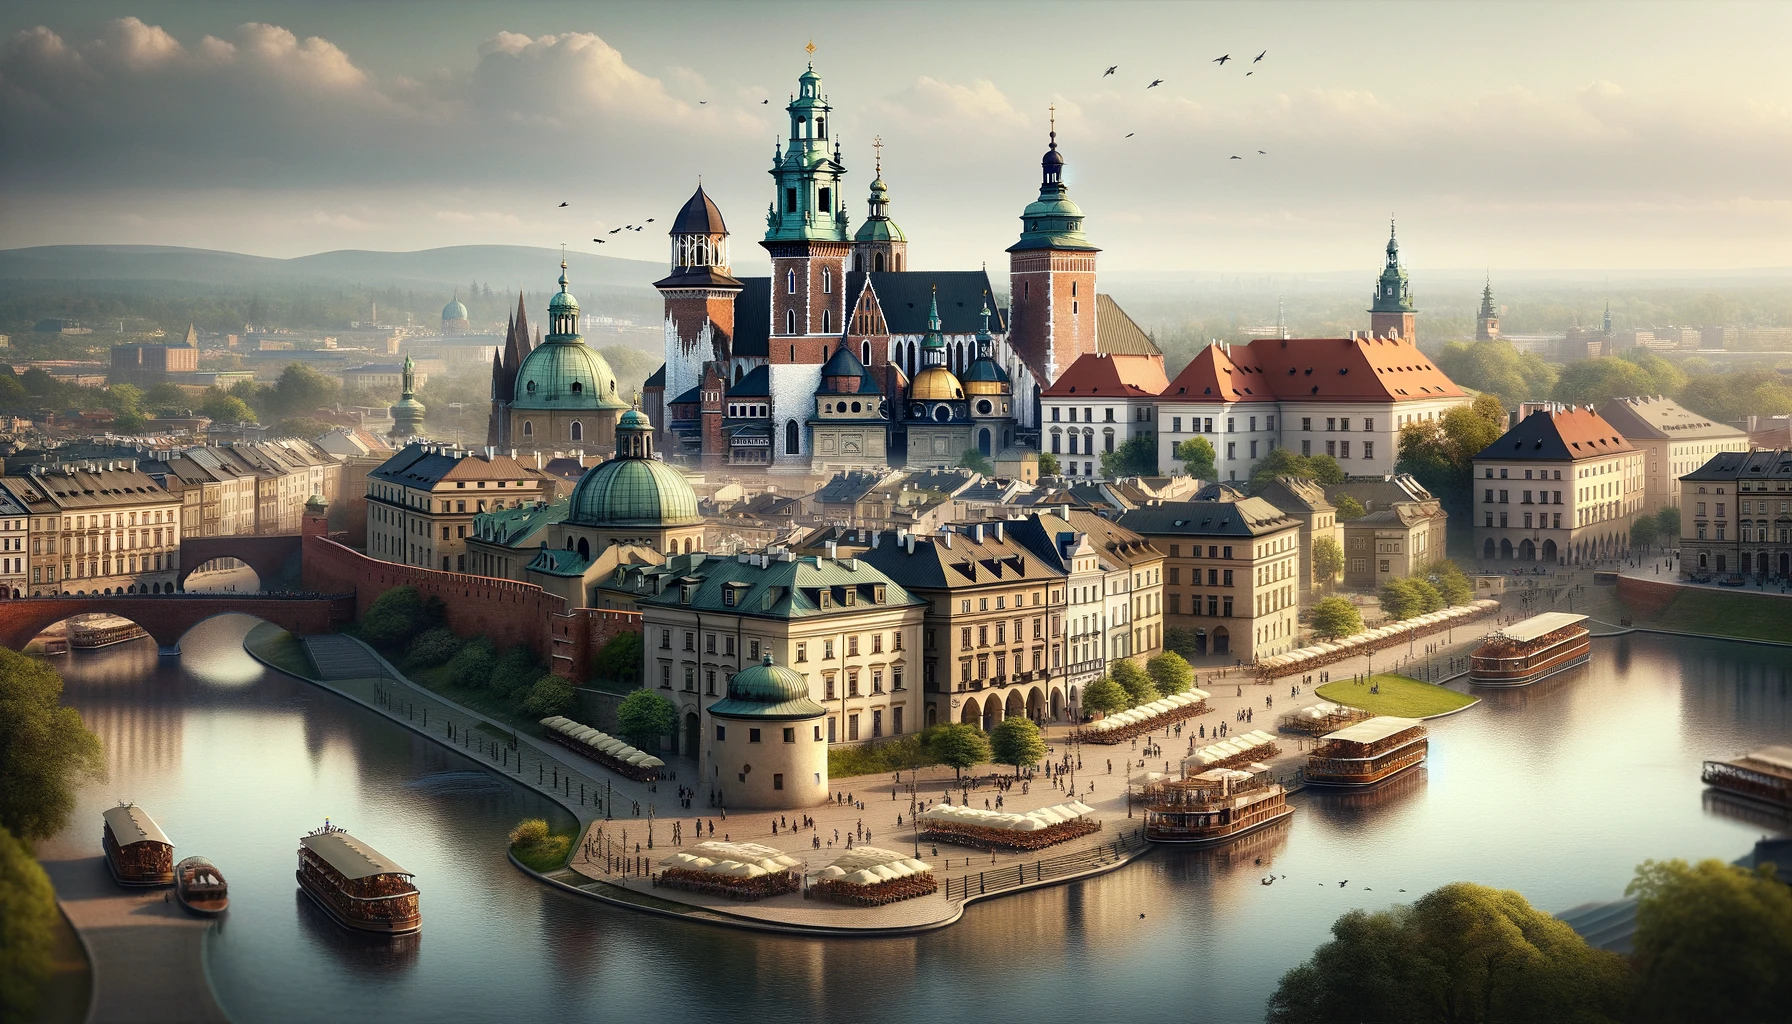 <p>Krakow, with its rich history and stunning architecture, is one of the most affordable cities in Europe. The city offers a high quality of life with low living costs, especially in terms of rent and food. Krakow is a cultural hub with numerous festivals and events throughout the year.</p>